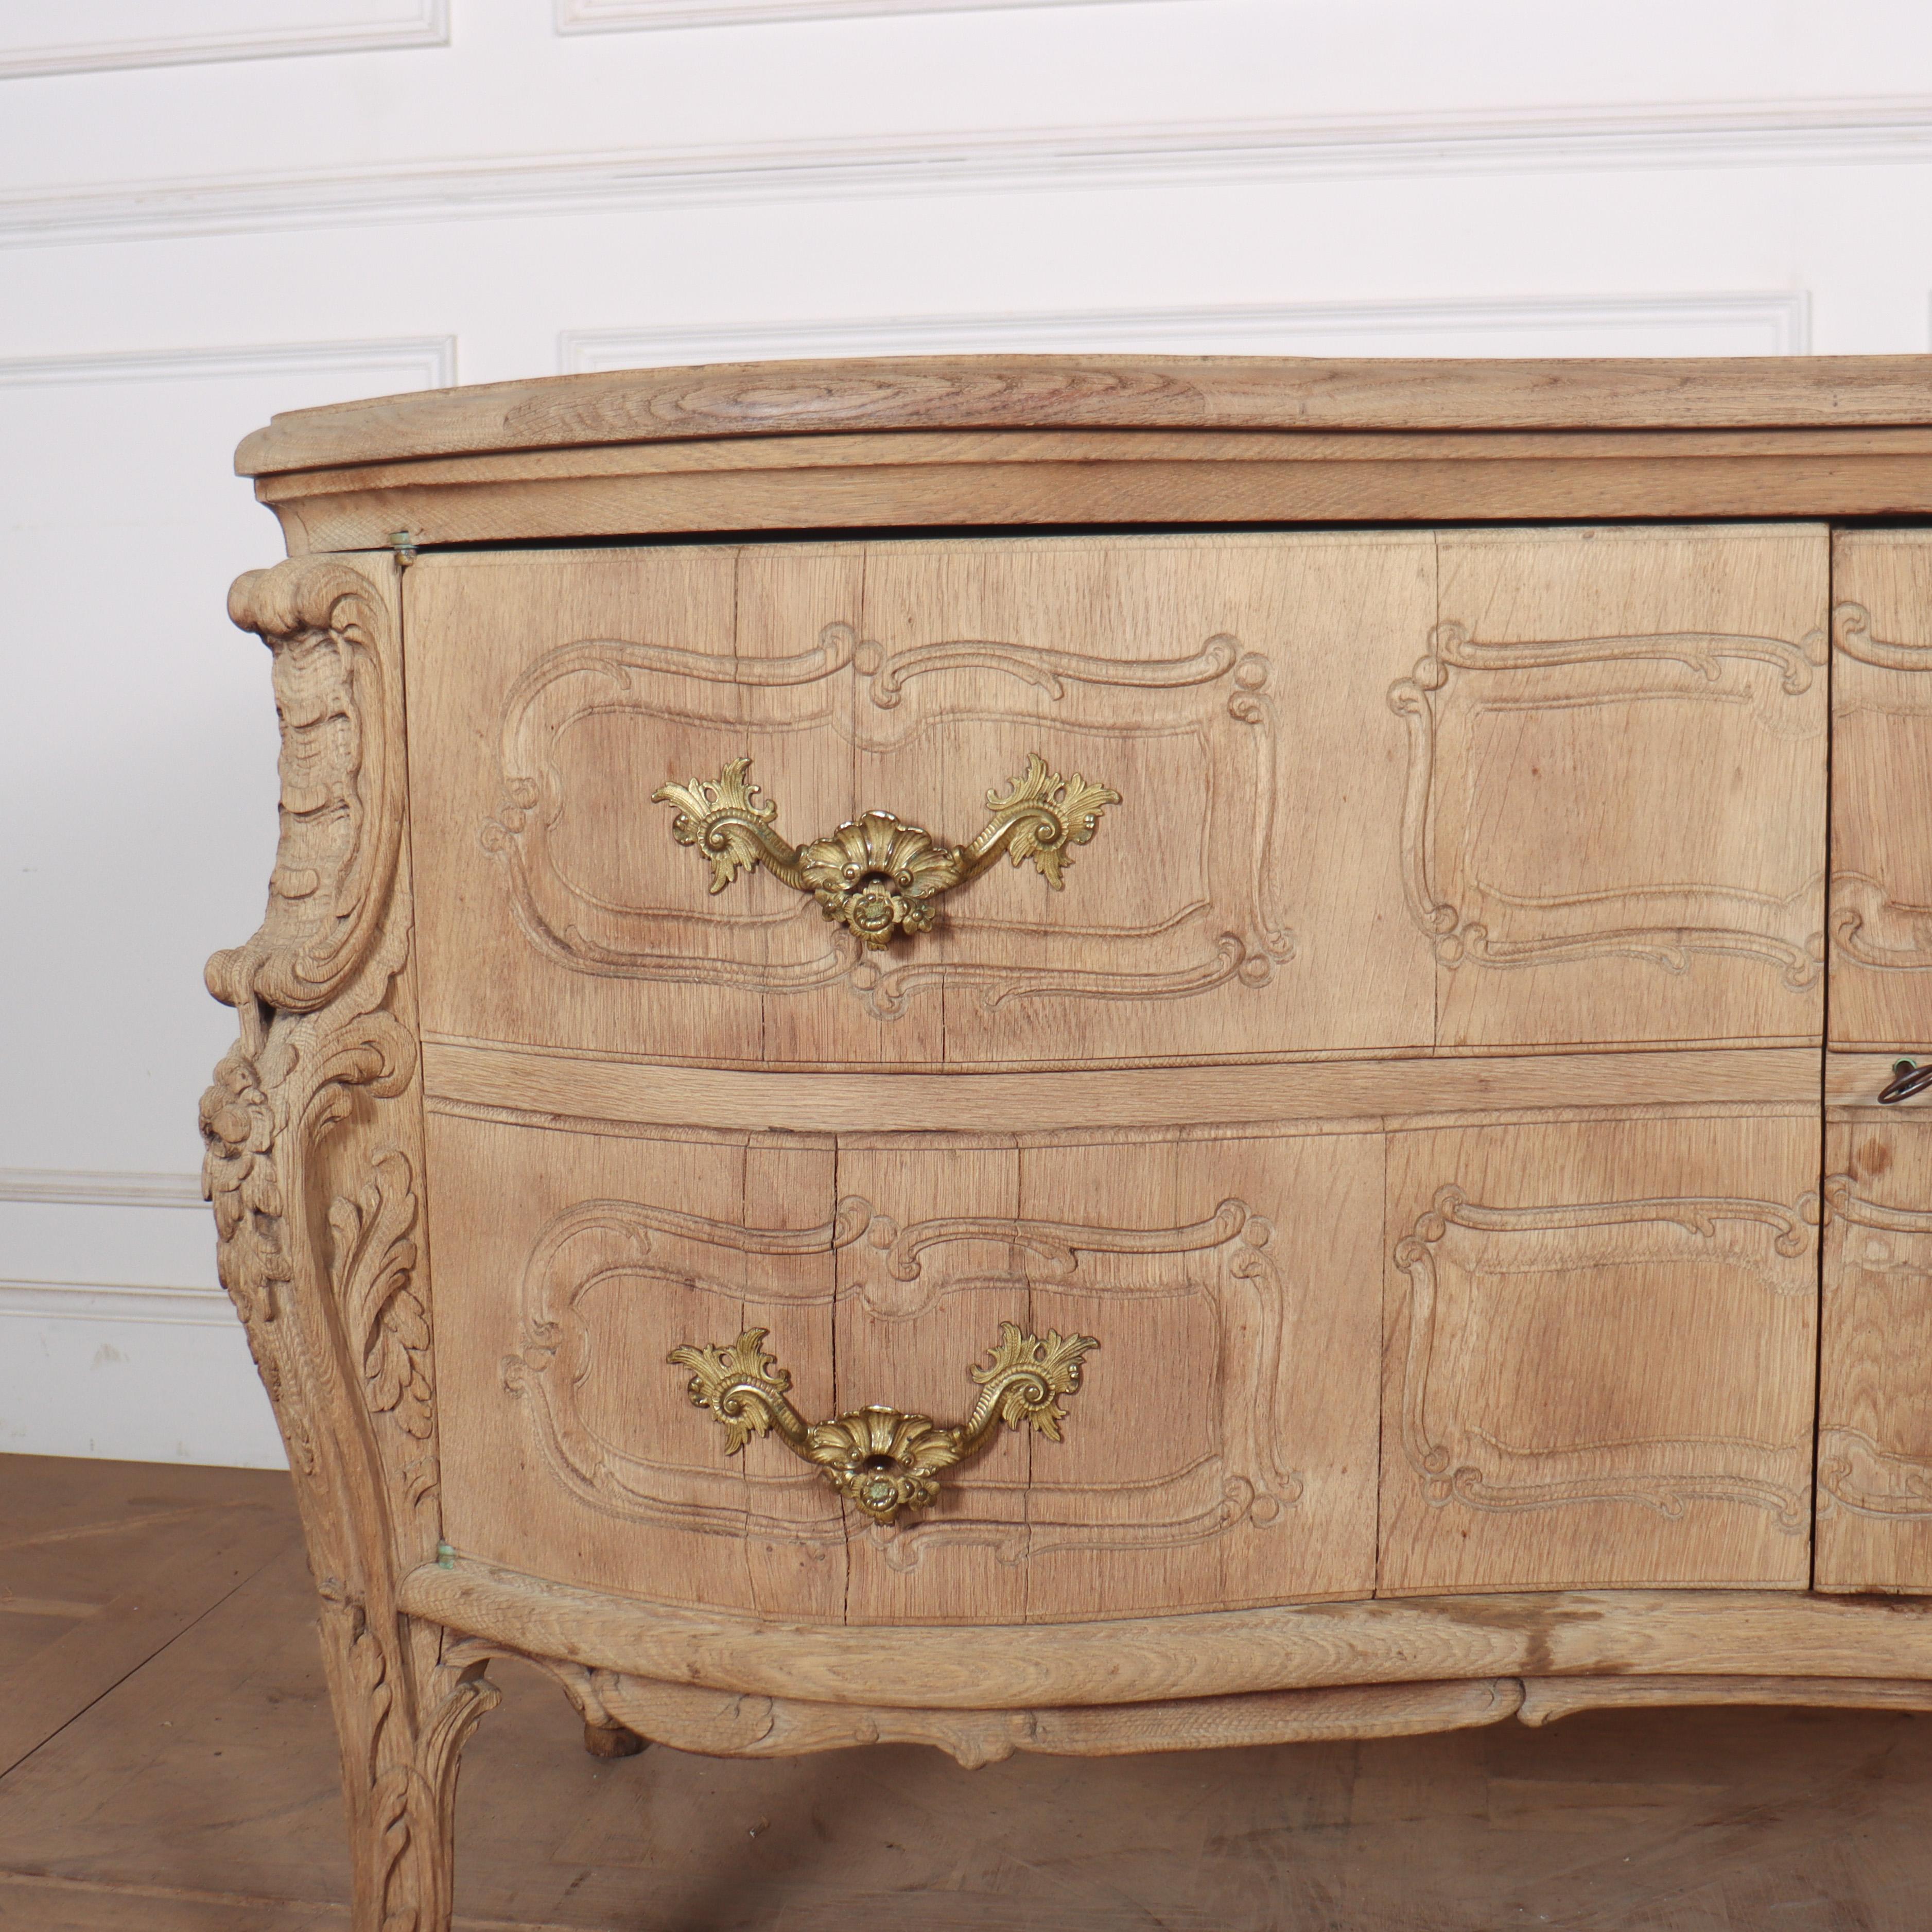 Very unusual French early 19th C bleached oak sideboard with 3 internal drawers. 1830.

Reference: 8175

Dimensions
61.5 inches (156 cms) Wide
31 inches (79 cms) Deep
36 inches (91 cms) High